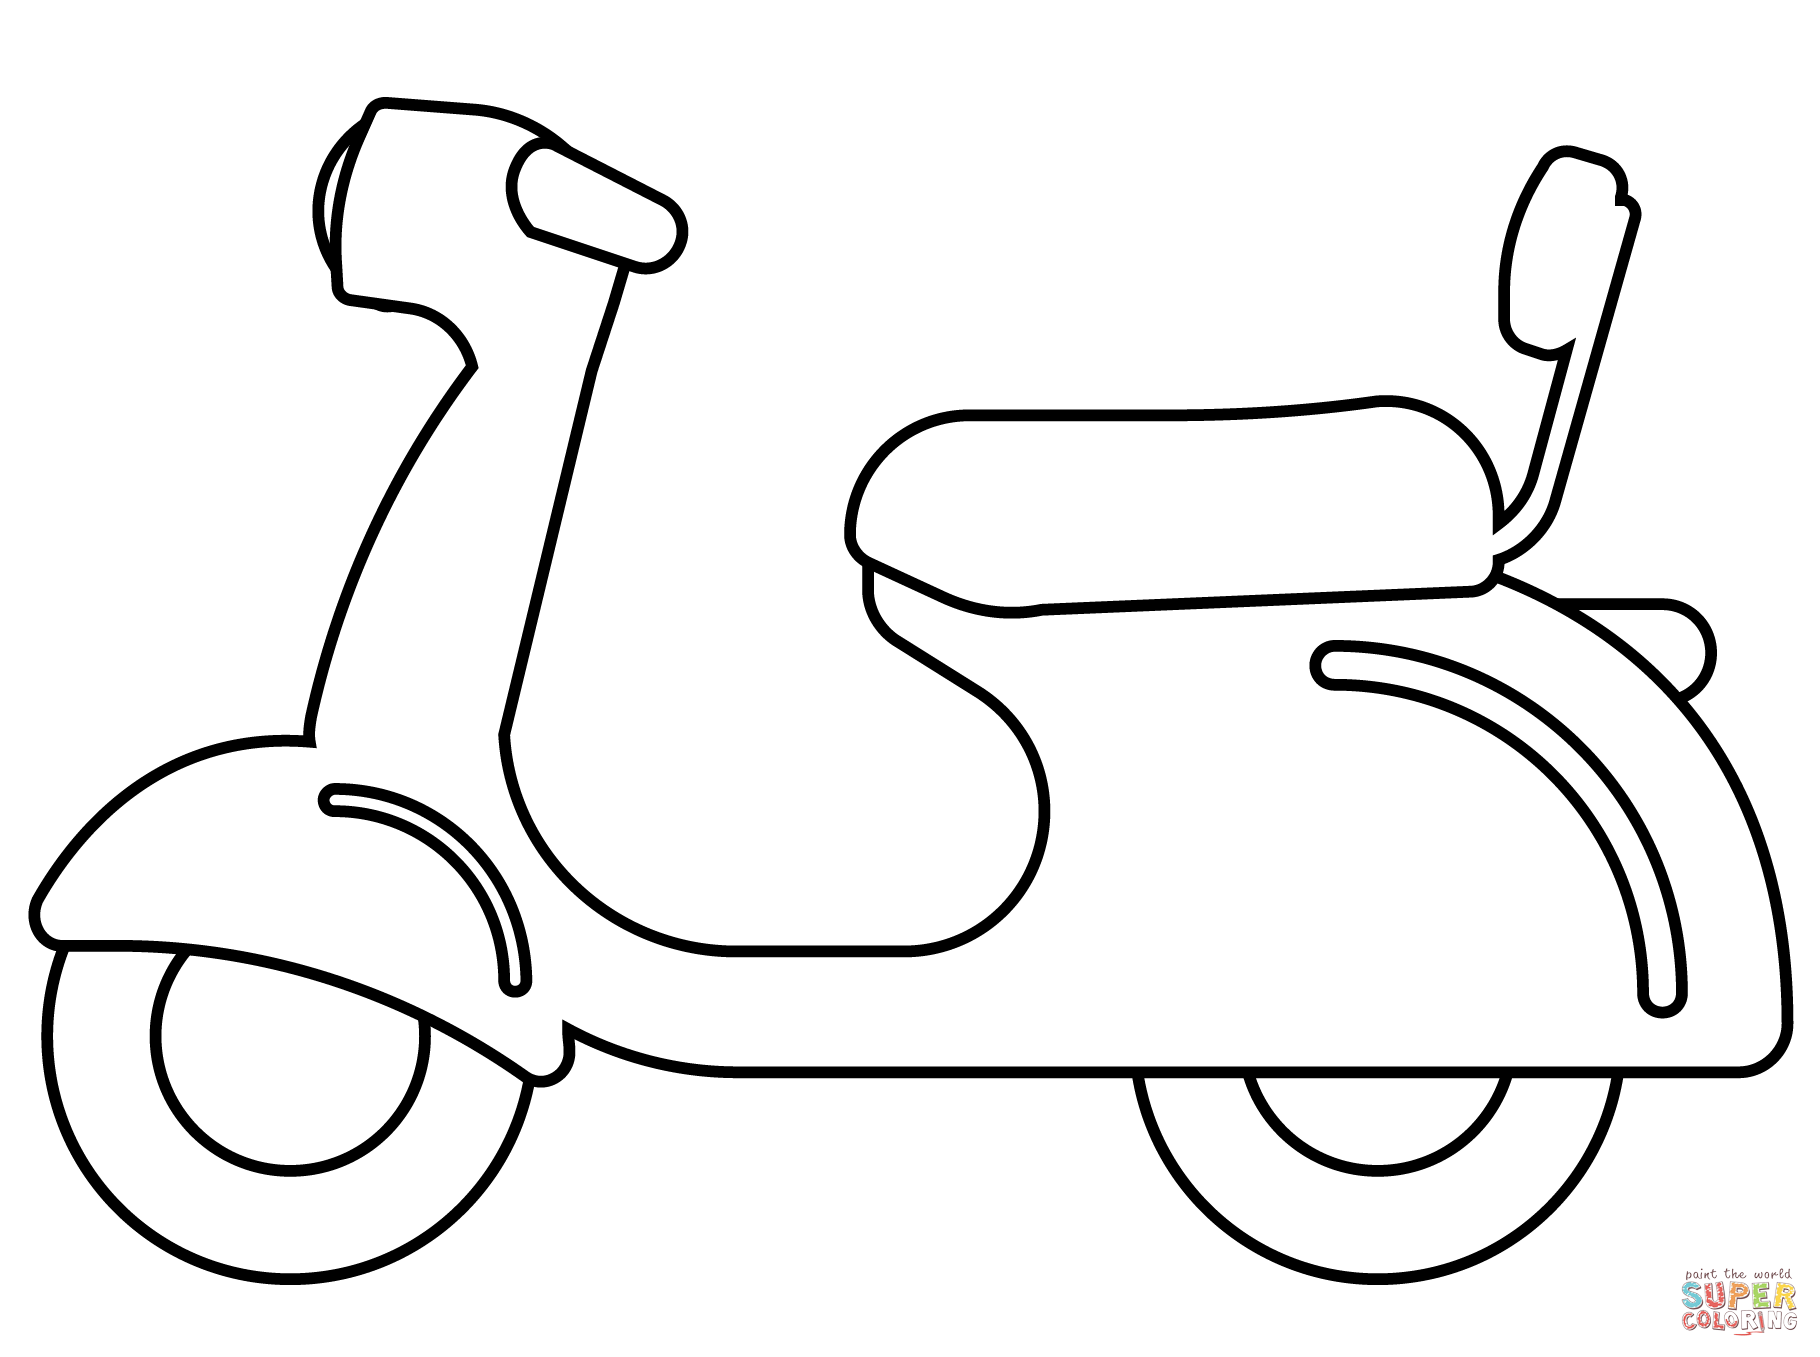 Motor Scooter Emoji coloring page | Free Printable Coloring Pages